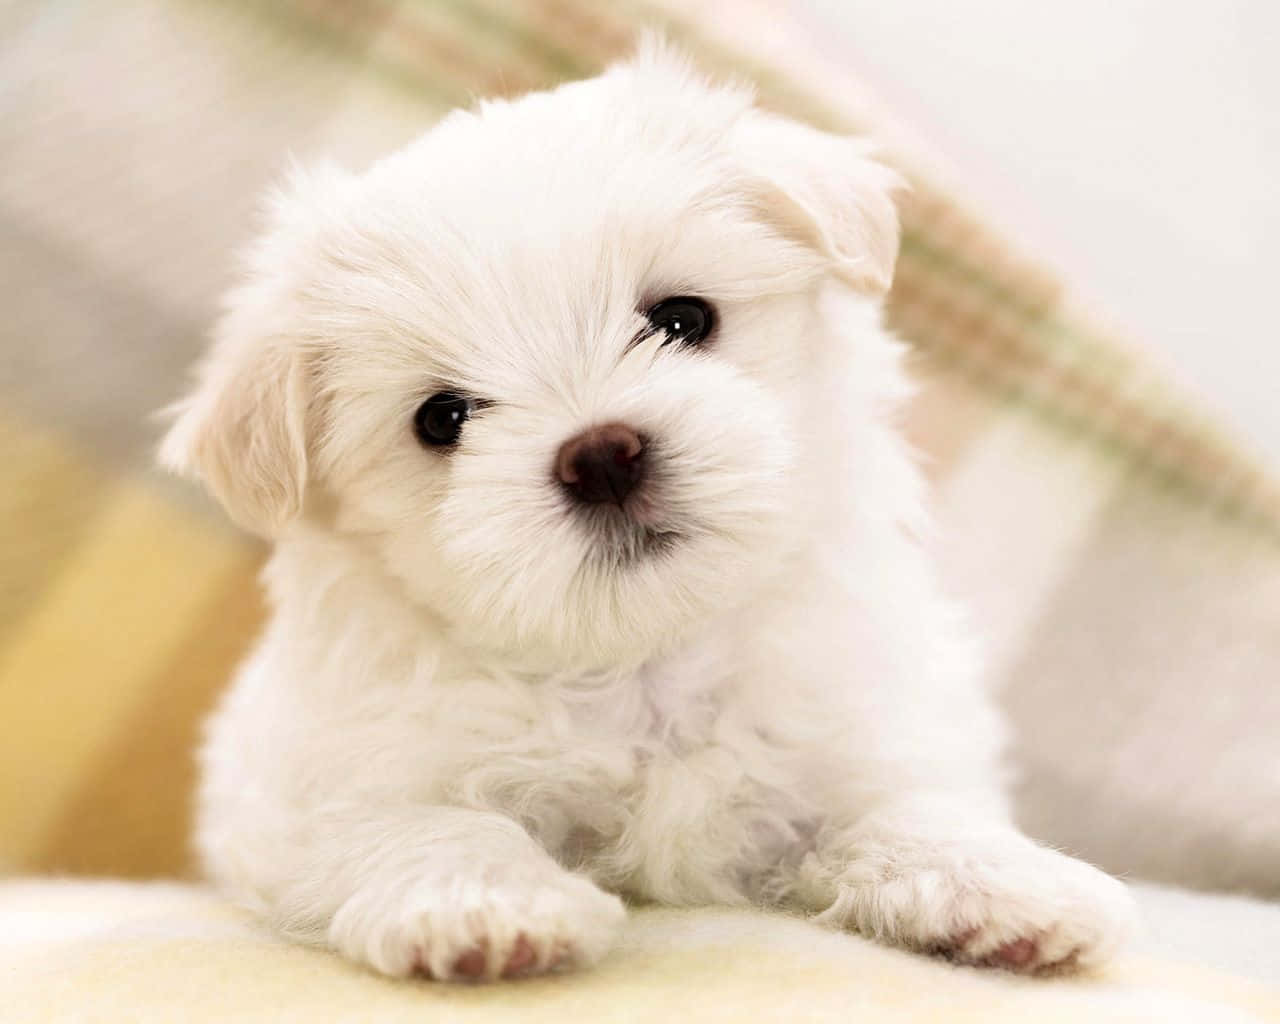 A White Puppy Is Sitting On A Blanket